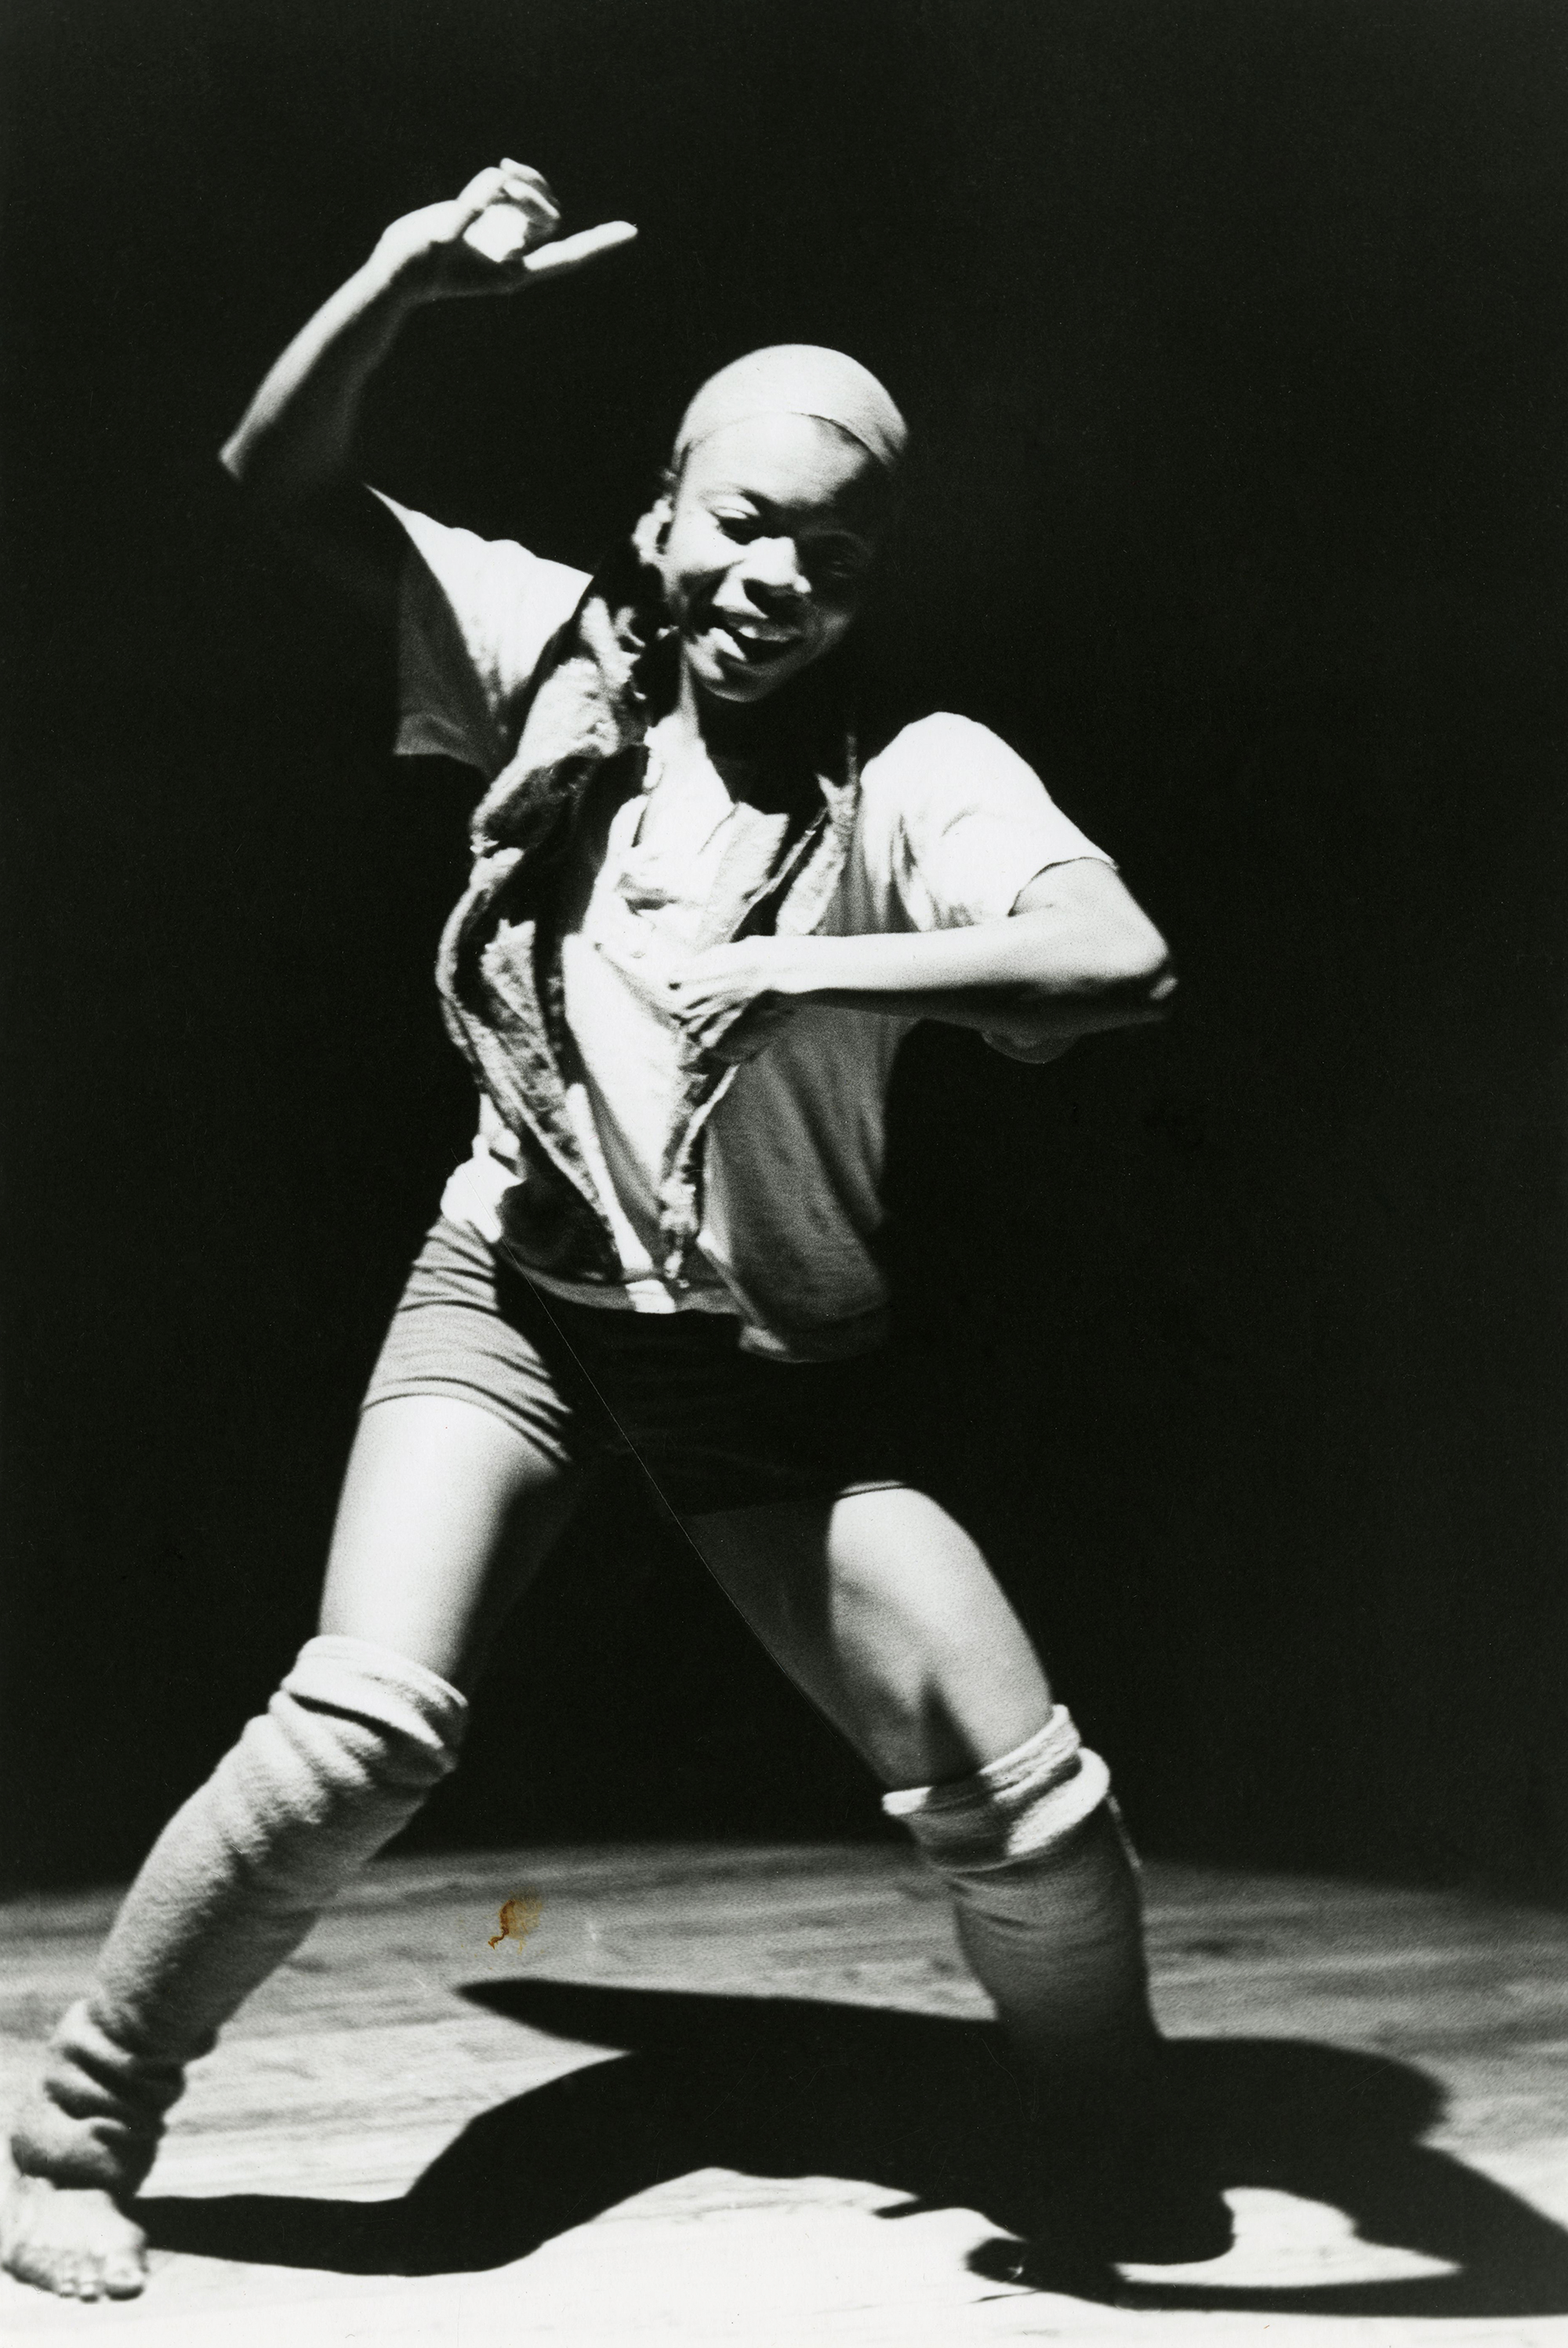 Lona Foote (American, 1948ñ1993). Blondell Cummings performing ìBlind Datesî at Just Above Midtown Gallery, November 1982, 1982. Photograph, 10 x 8 in. (25.4 x 20.3 cm). Special Collections and University Archives, Rutgers University Libraries. © Estate of Lona Foote, courtesy of Howard Mandel